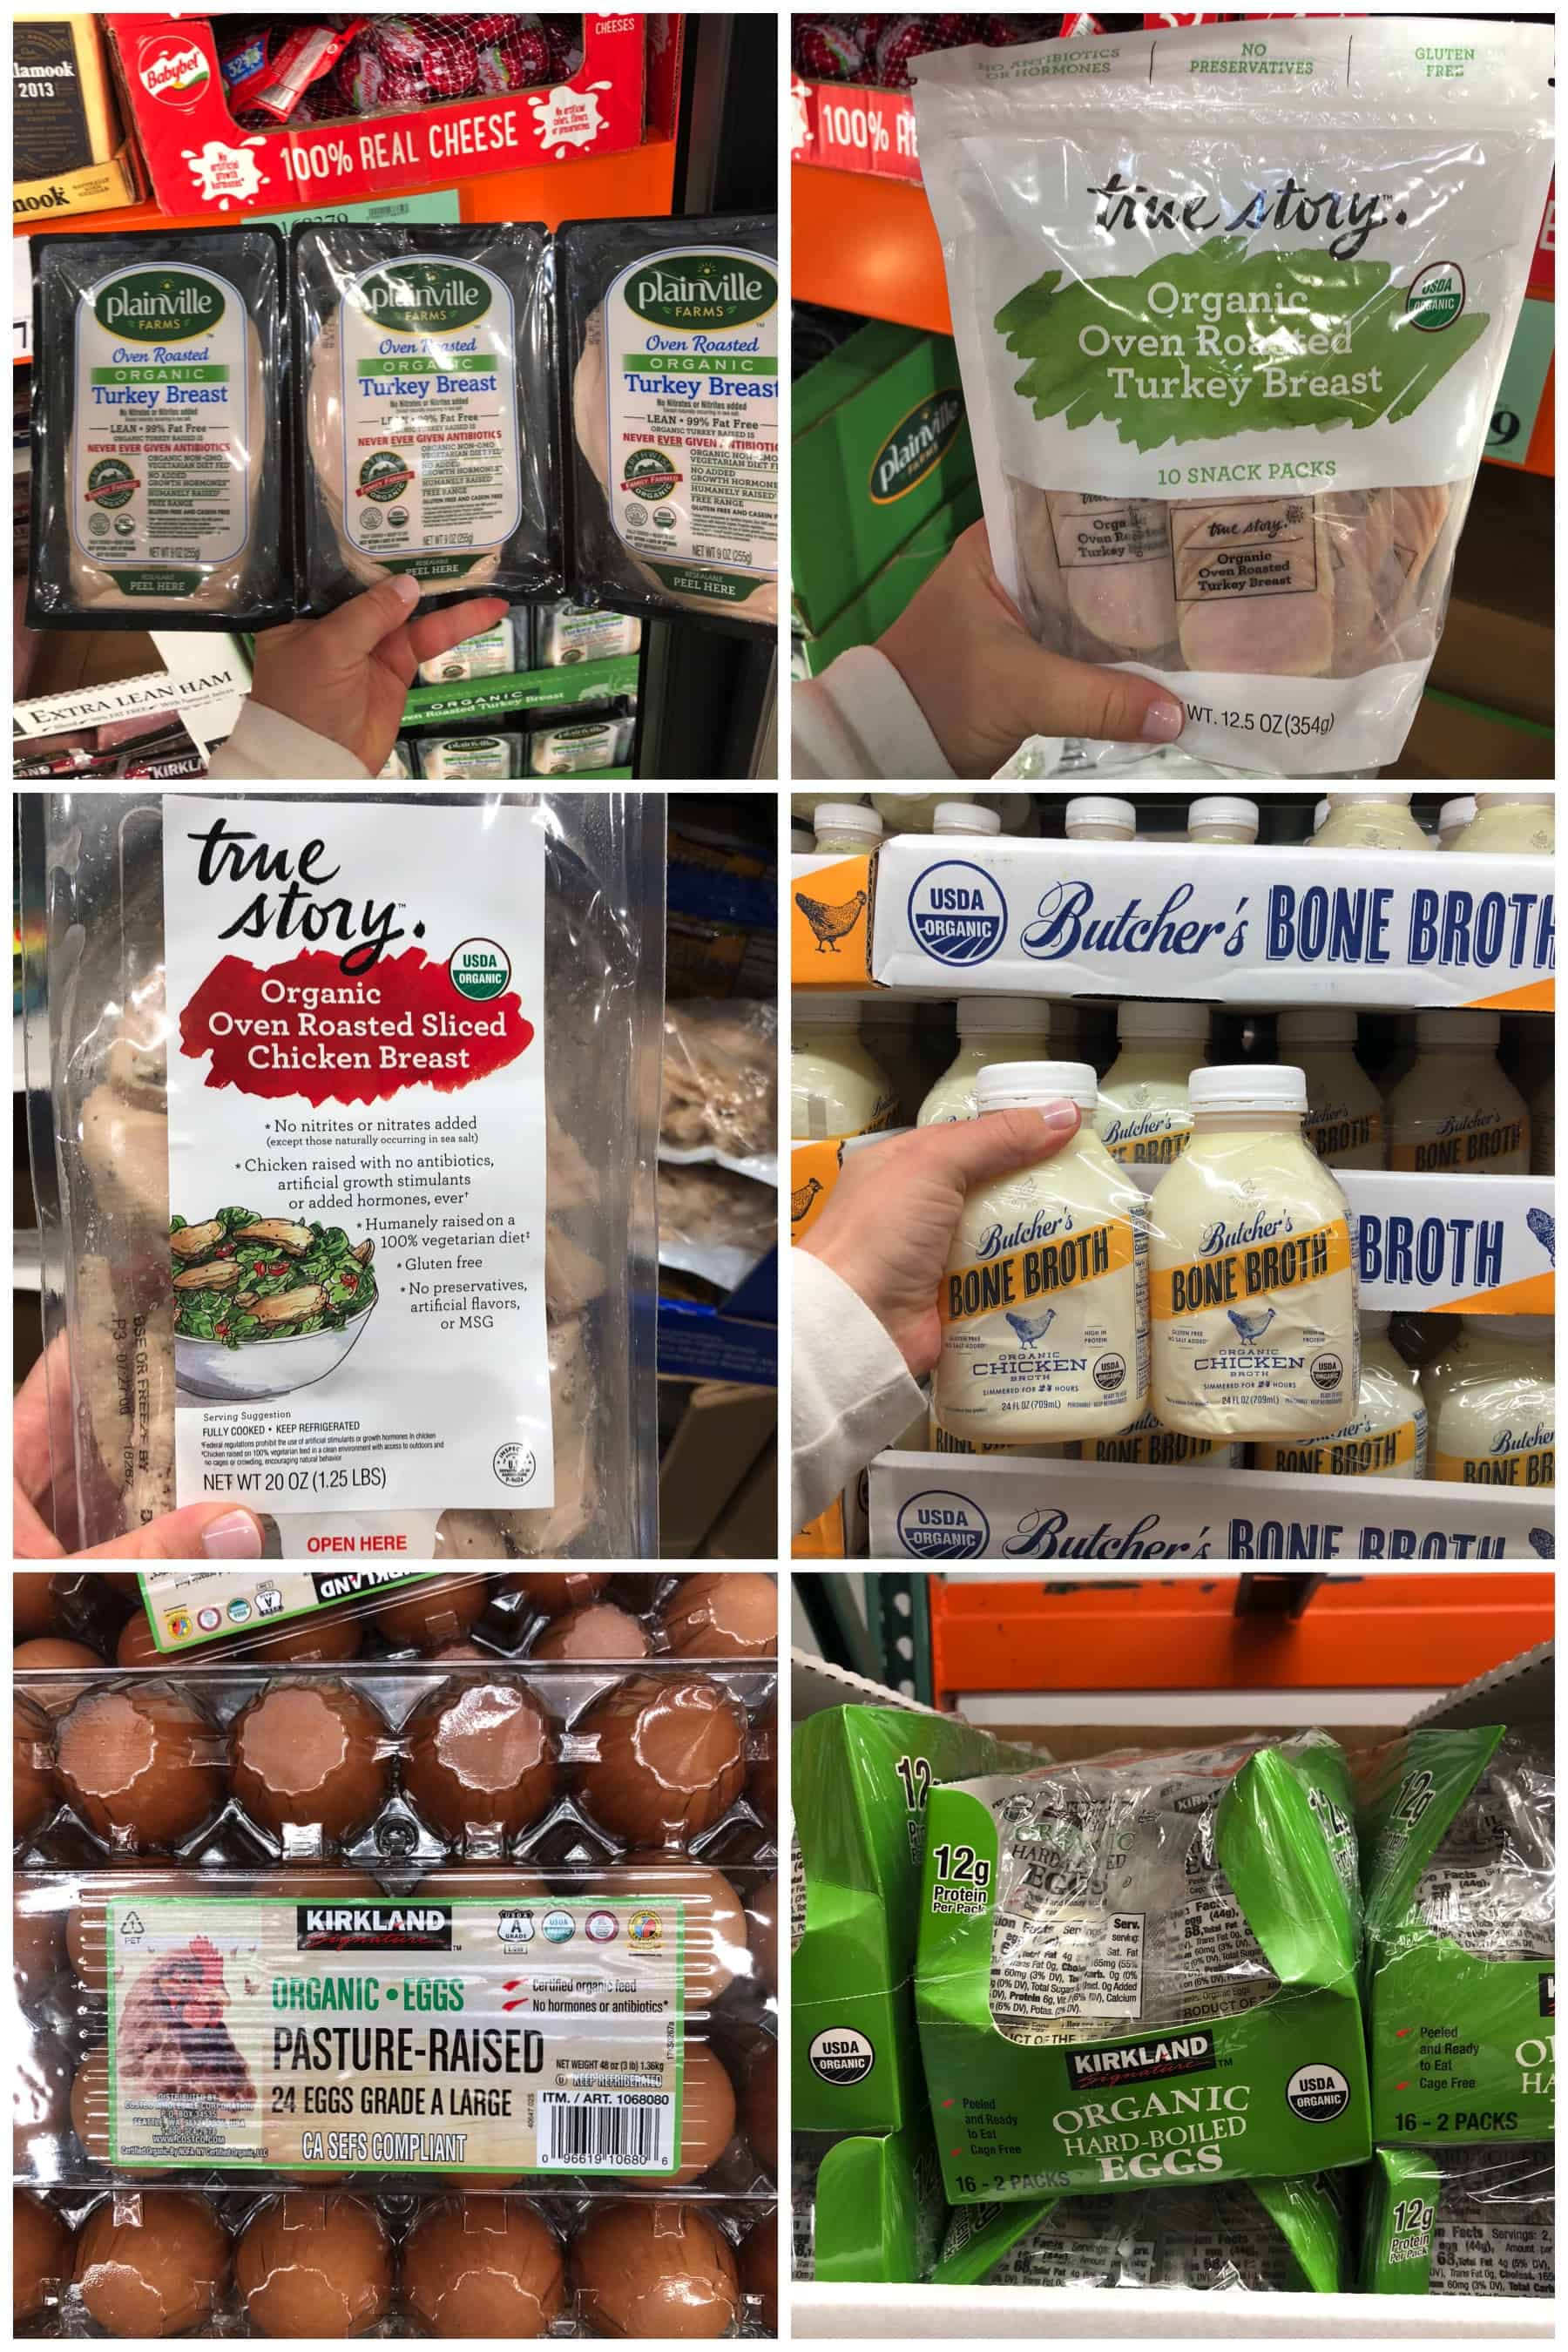 eggs, deli meat, and broth for Whole30 shopping list at Costco